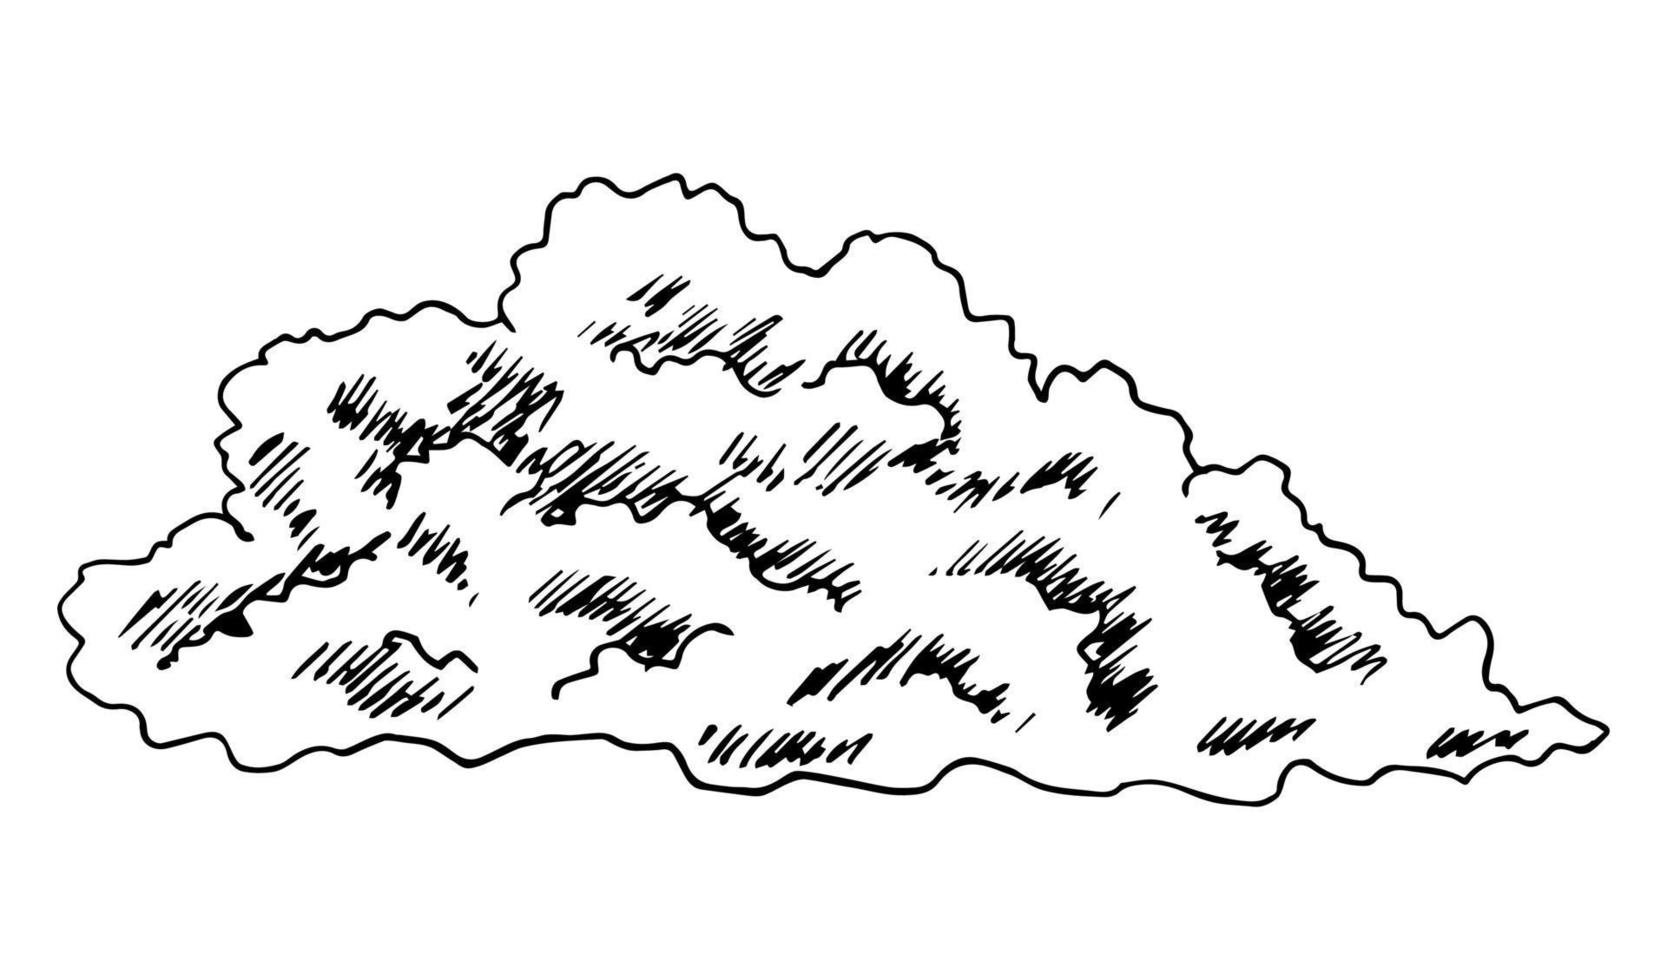 Hand-drawn vector ink drawing in engraving style. Thundercloud, cumulus cloud, storm, windy weather, rainy season. Climate, air, nature.